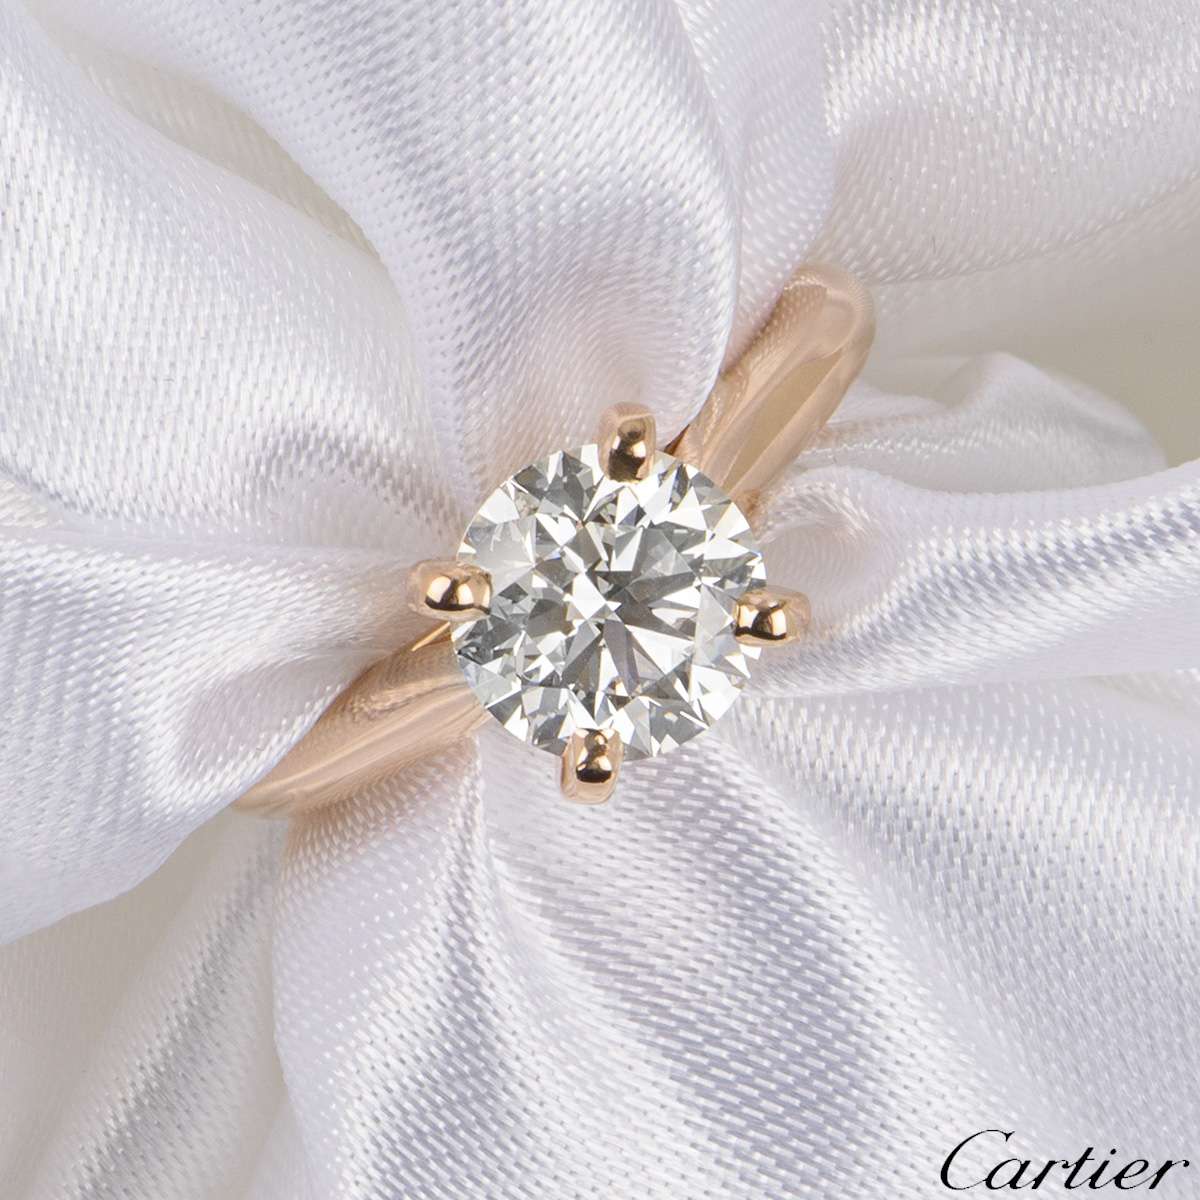 cartier rose gold engagement ring